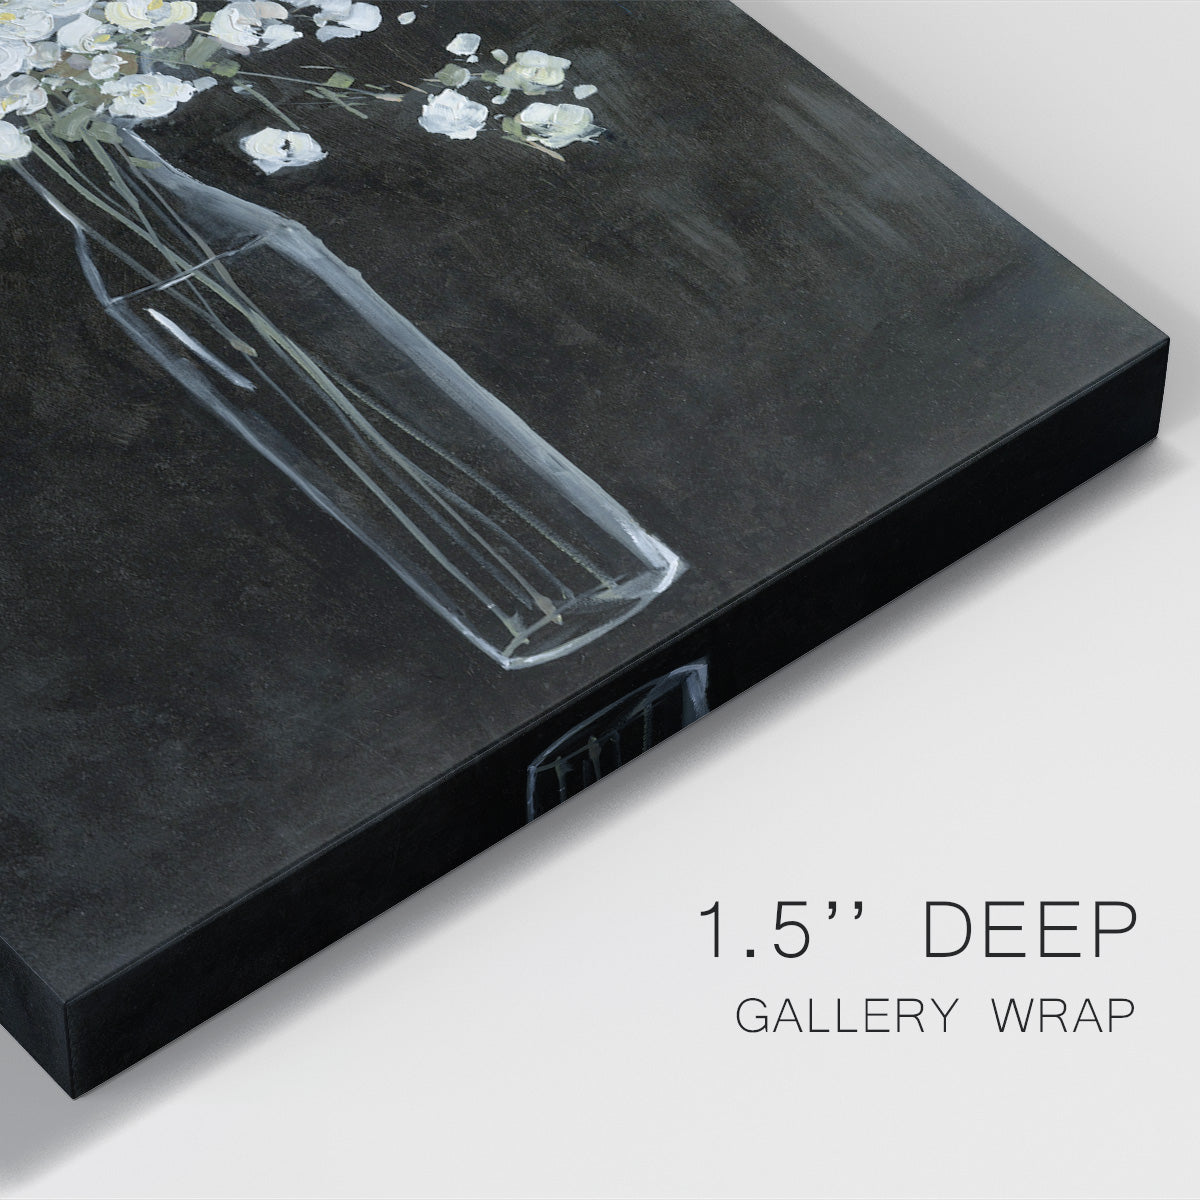 Filled with Spring Premium Gallery Wrapped Canvas - Ready to Hang